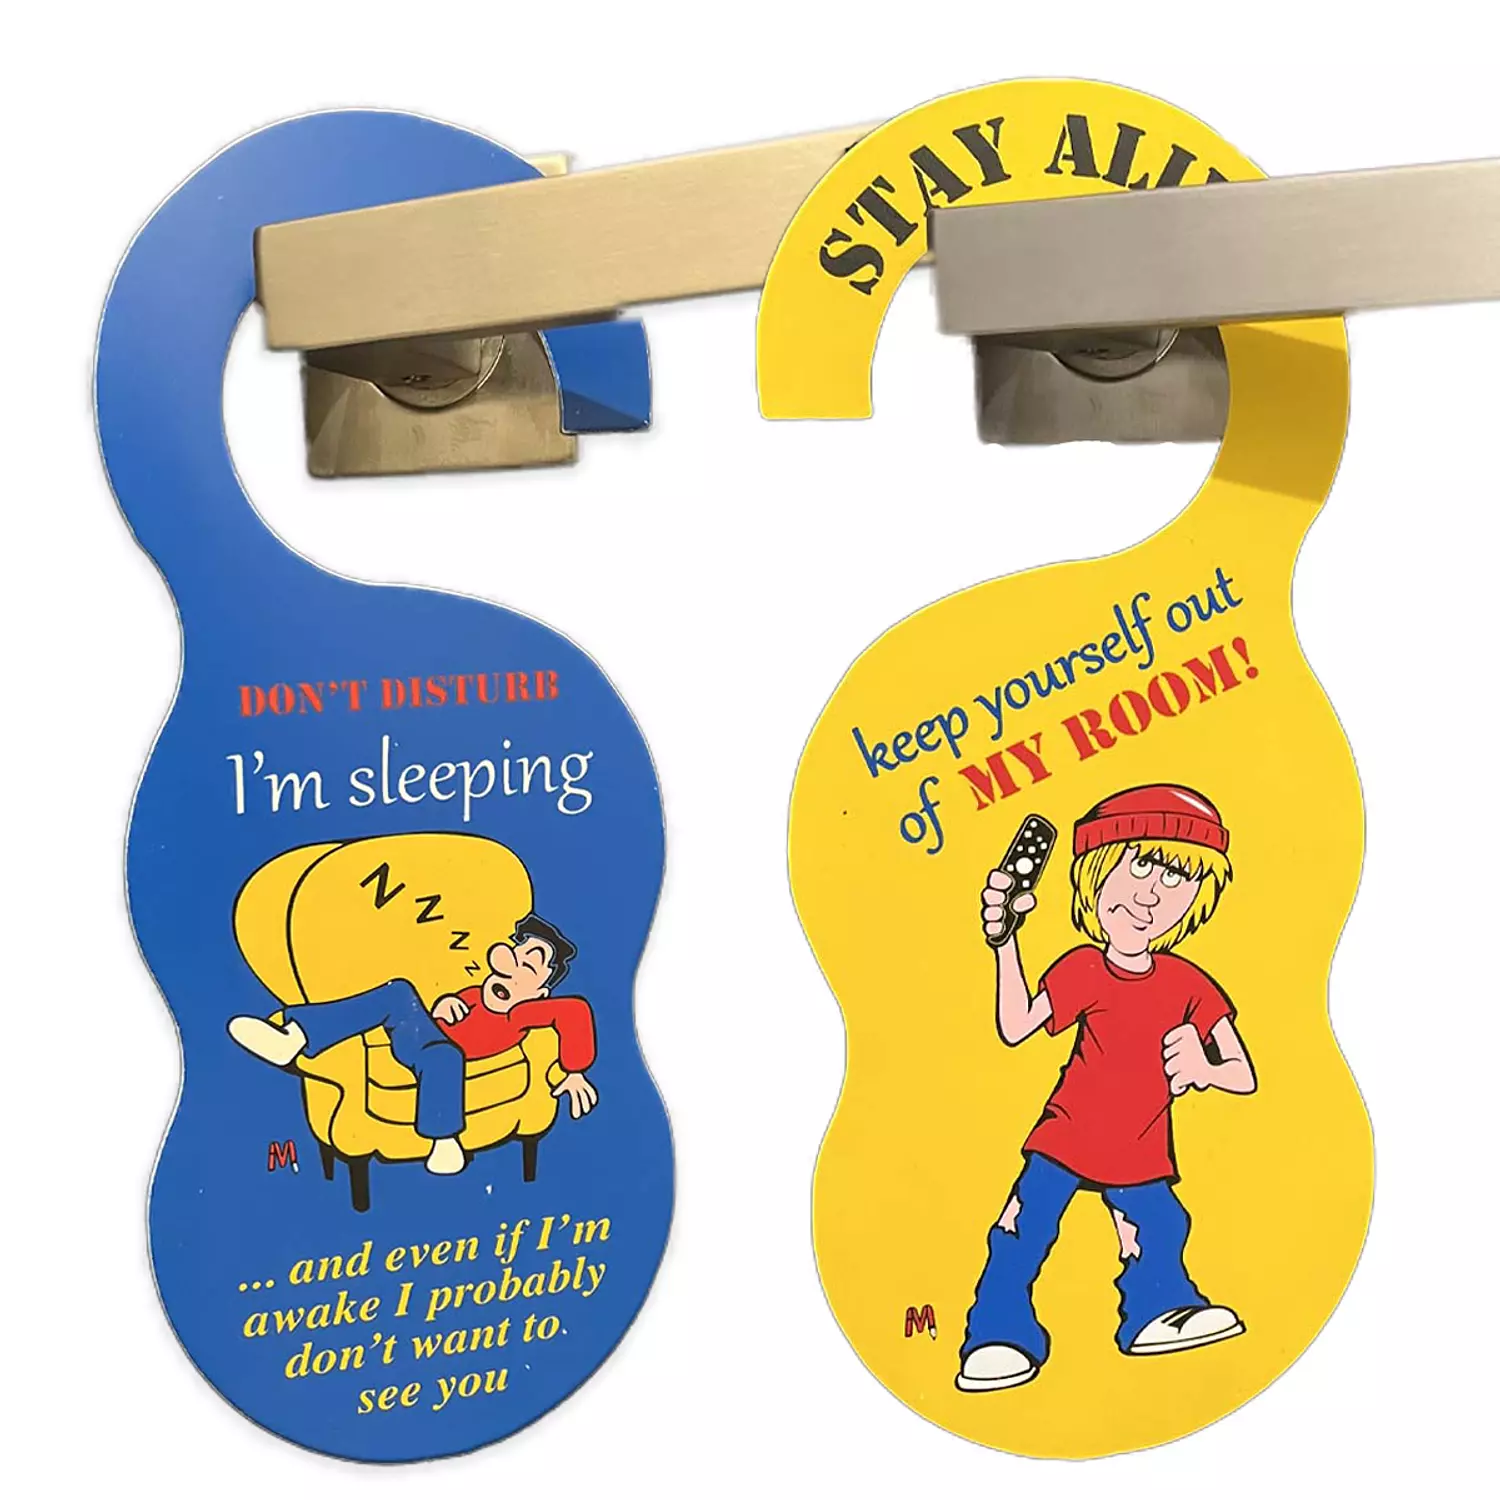 Memo Door Hanger Sign (Don’t Disturb. I’m Sleeping) & (Stay Alive Keep Yourself Out of My Room) 0